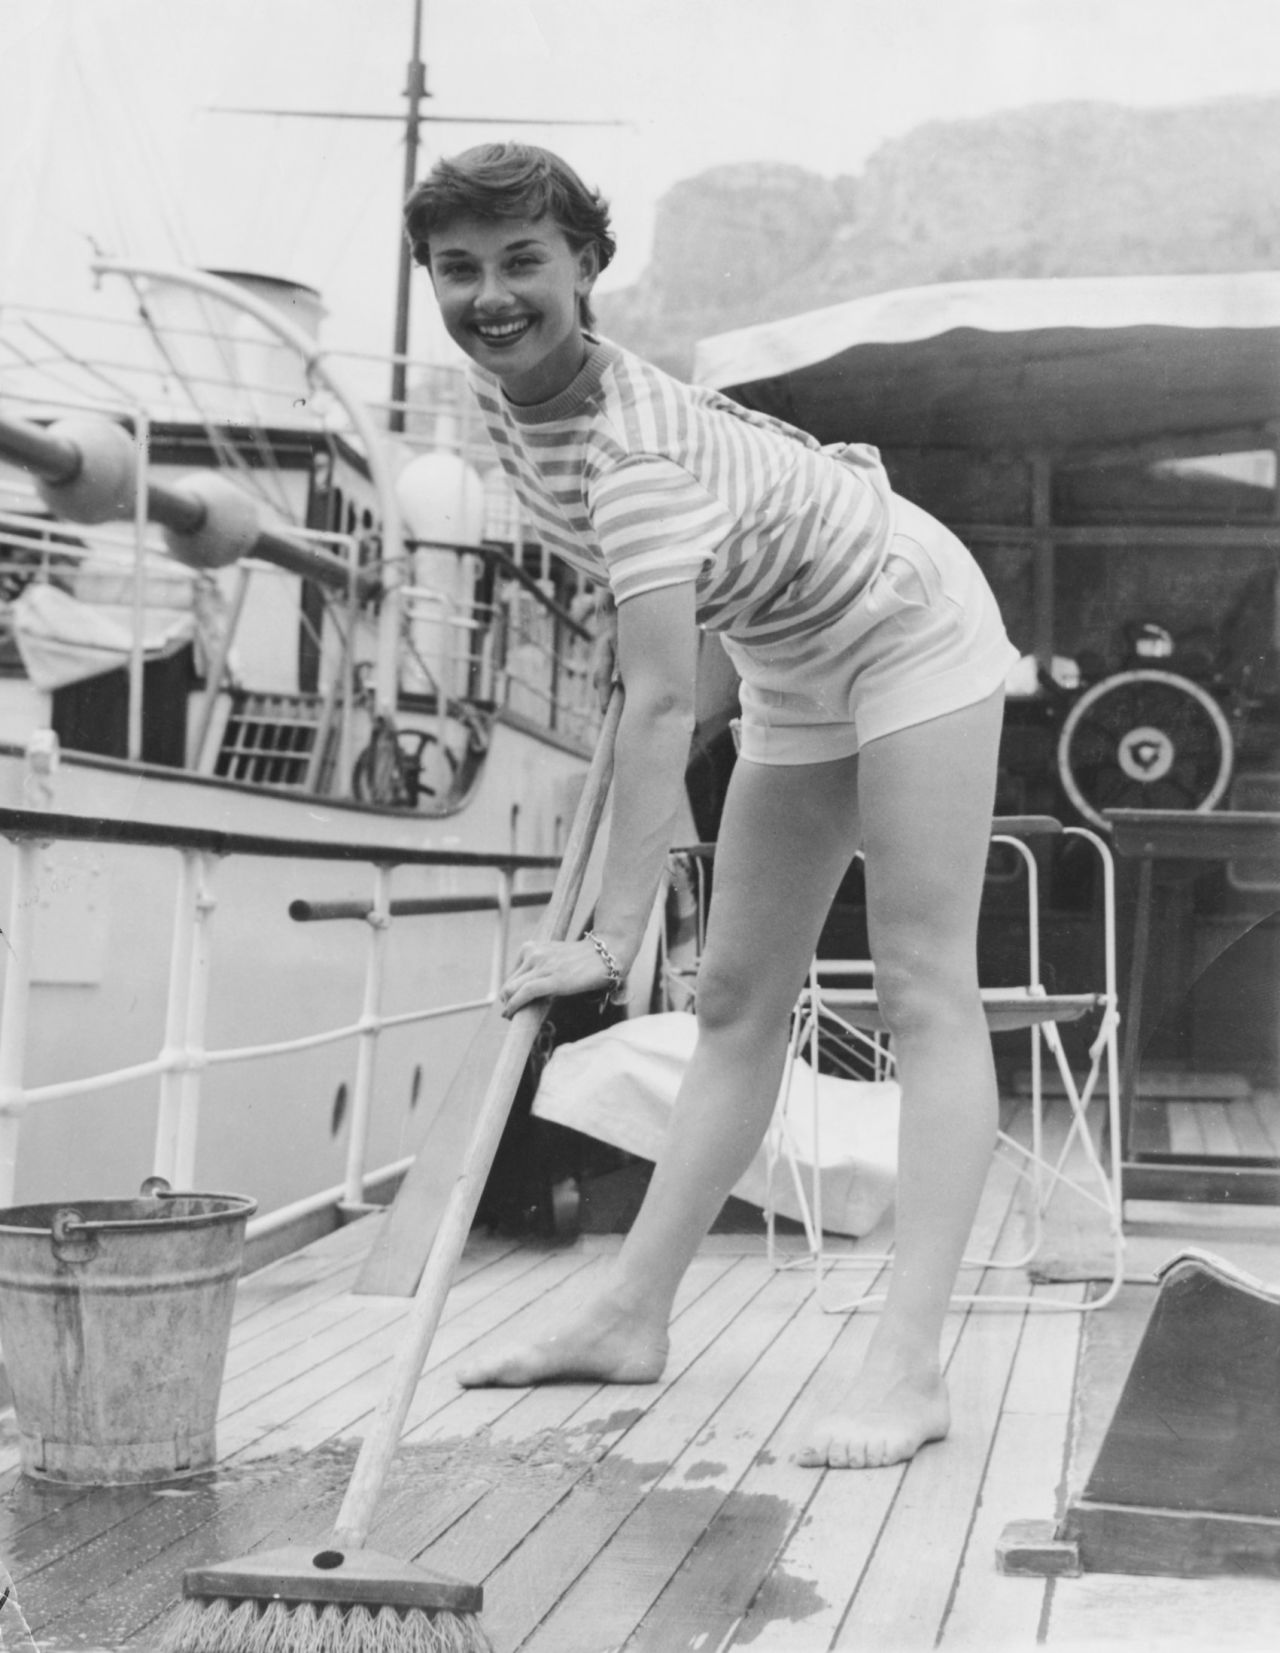 Deckhands don't come much more glamorous than actress Audrey Hepburn, pictured in 1955.<br />Stripes have a long tradition in nautical fashion, dating back to 19th century French fisherman, and later adopted by the French navy, explains fashion historian <a href="http://theatreoffashion.co.uk/" target="_blank" target="_blank">Amber Butchart </a>in her new book <a href="http://www.thamesandhudson.com/Nautical_Chic/9780500517802" target="_blank" target="_blank">"Nautical Chic." </a>